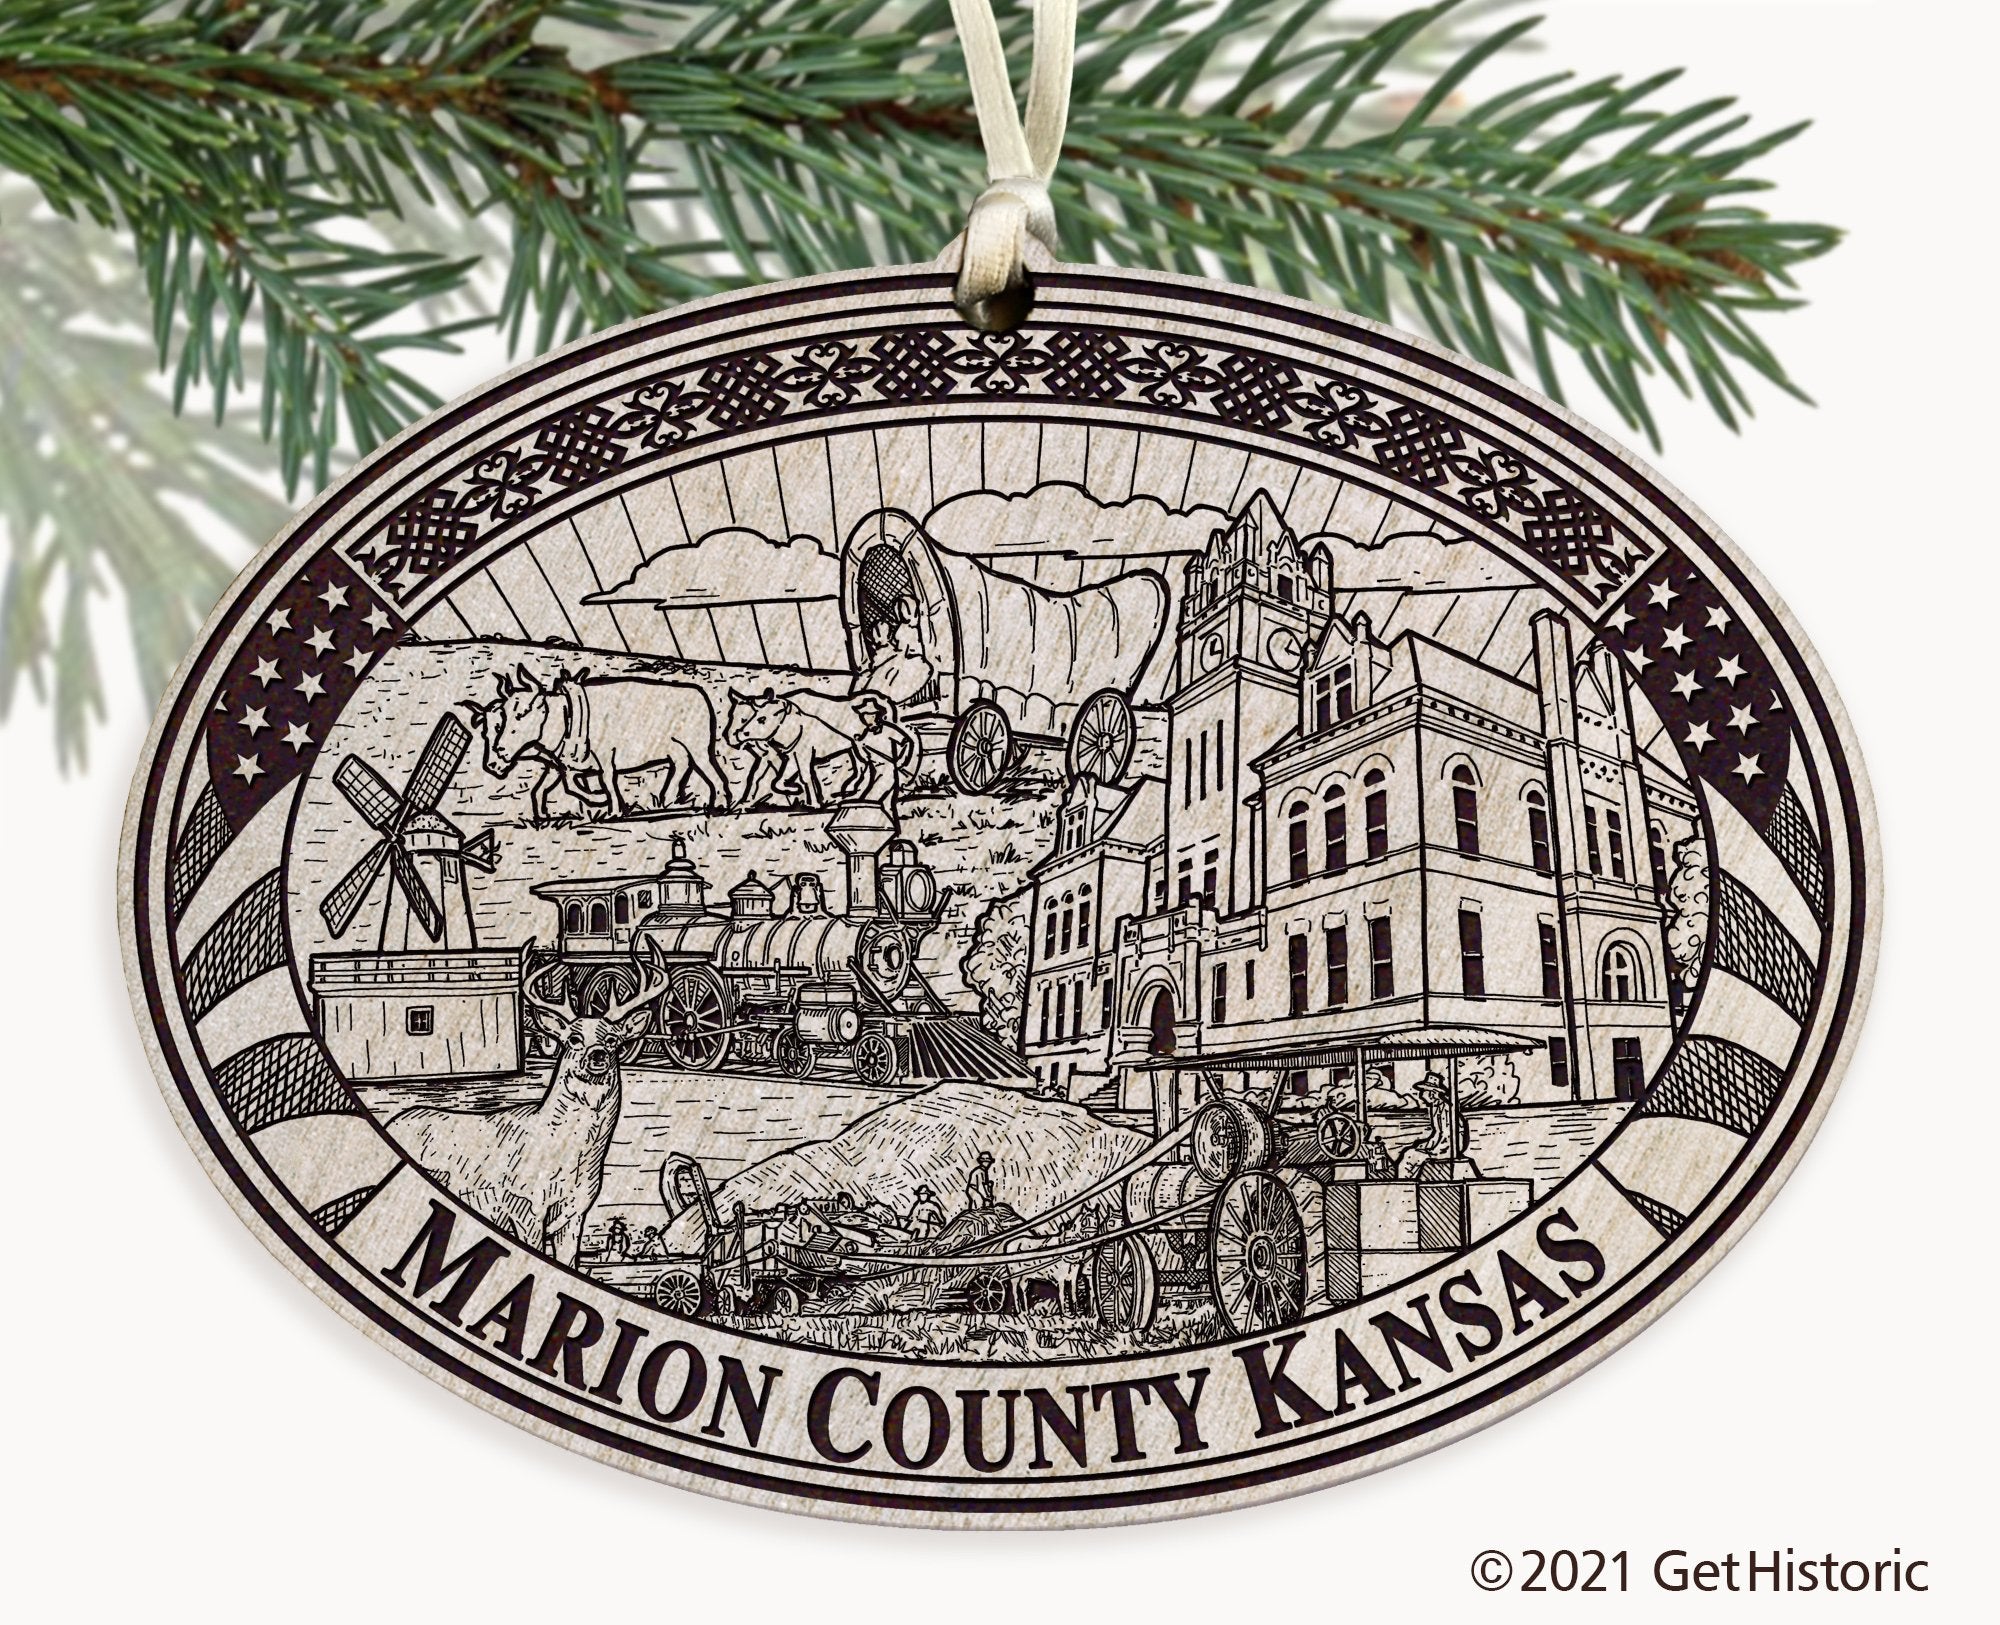 Marion County Kansas Engraved Ornament